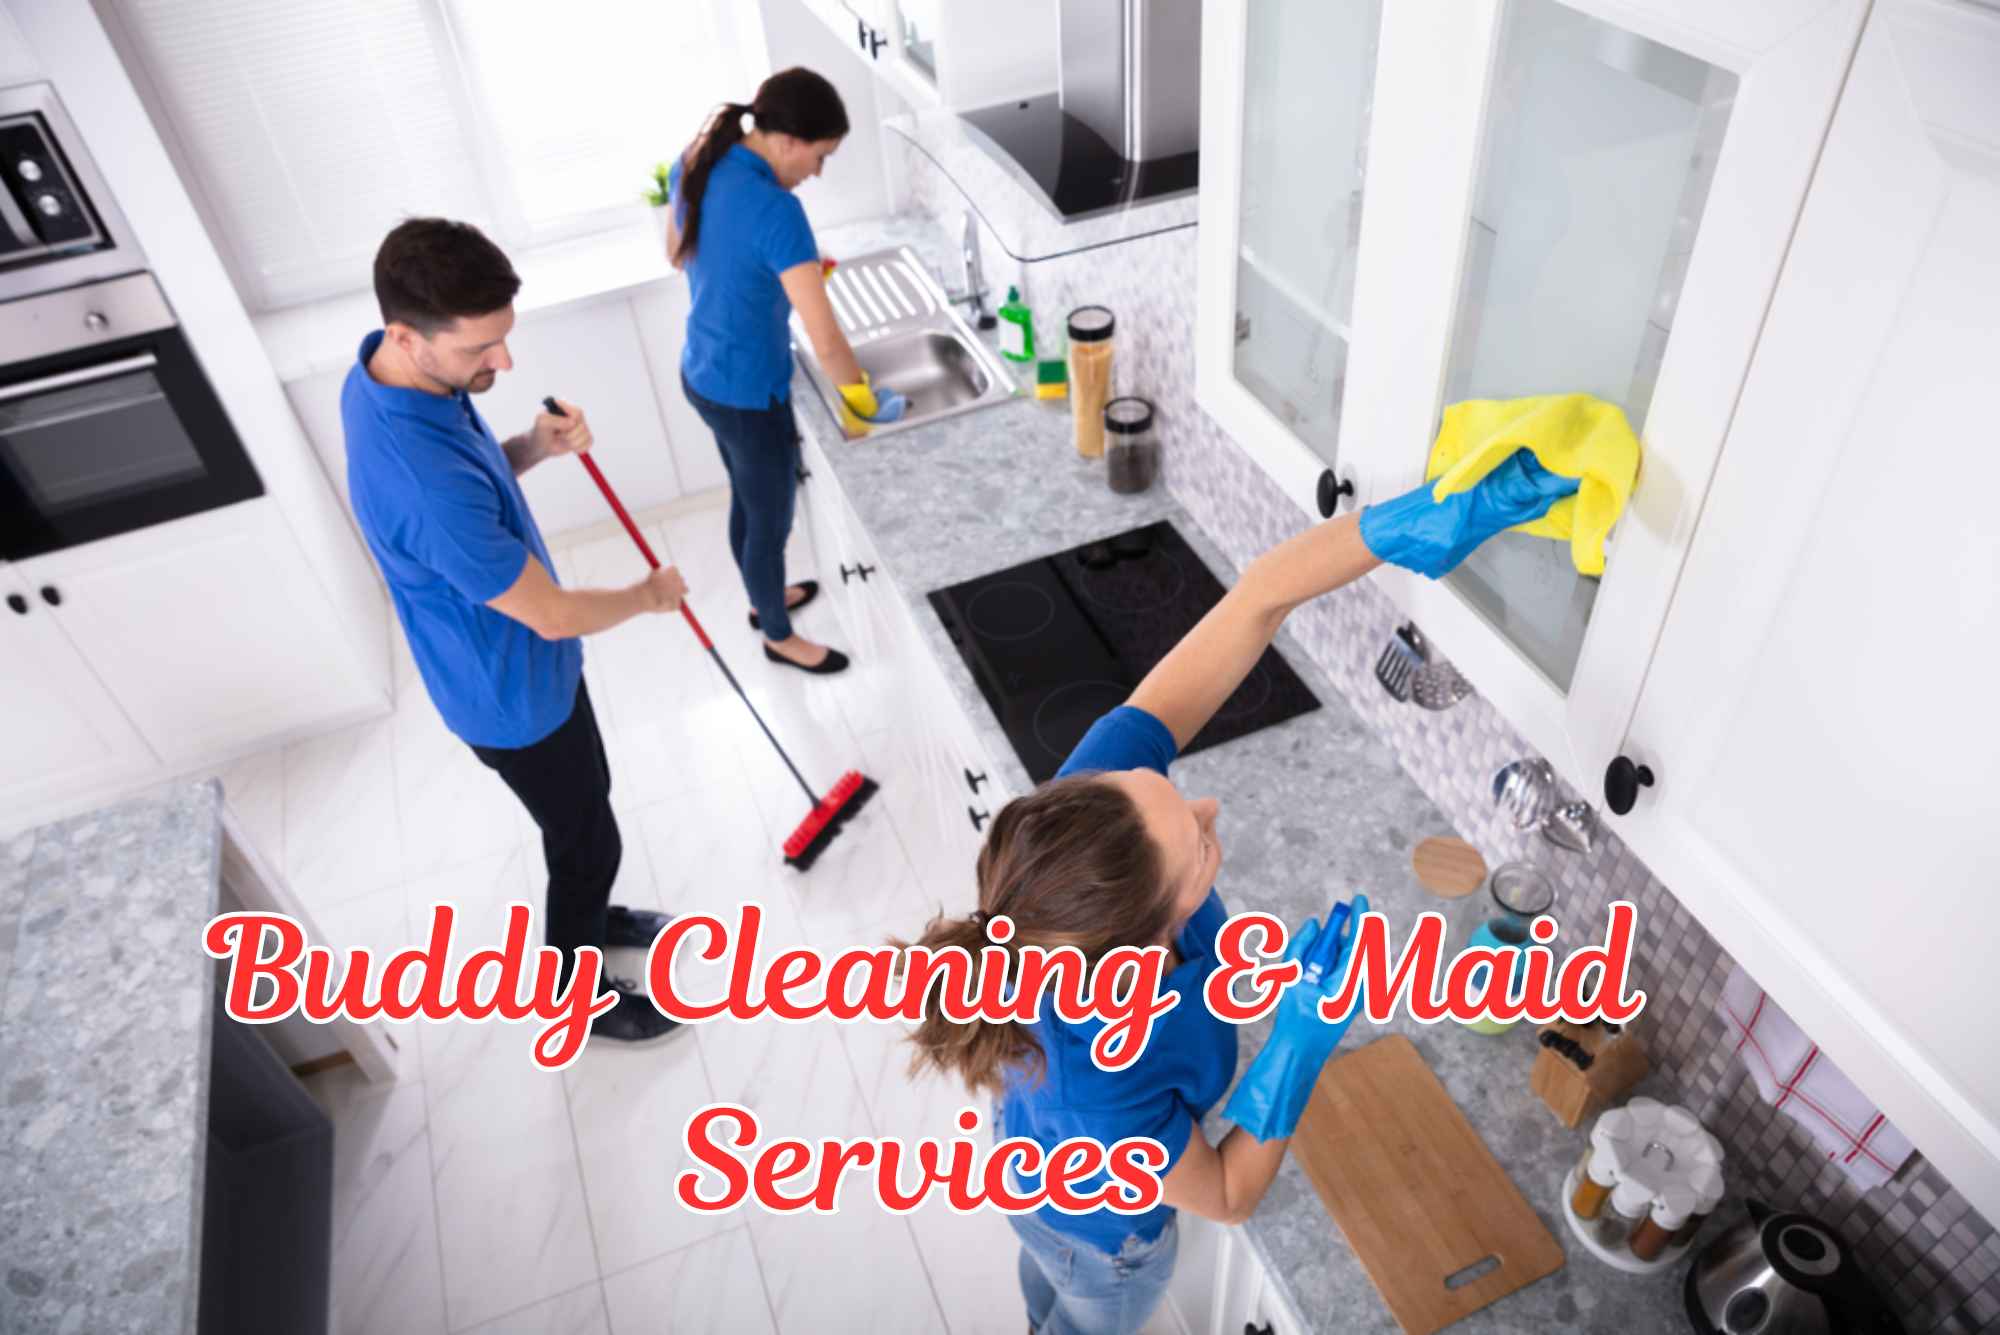 Buddy Cleaning & Maid Services (5)